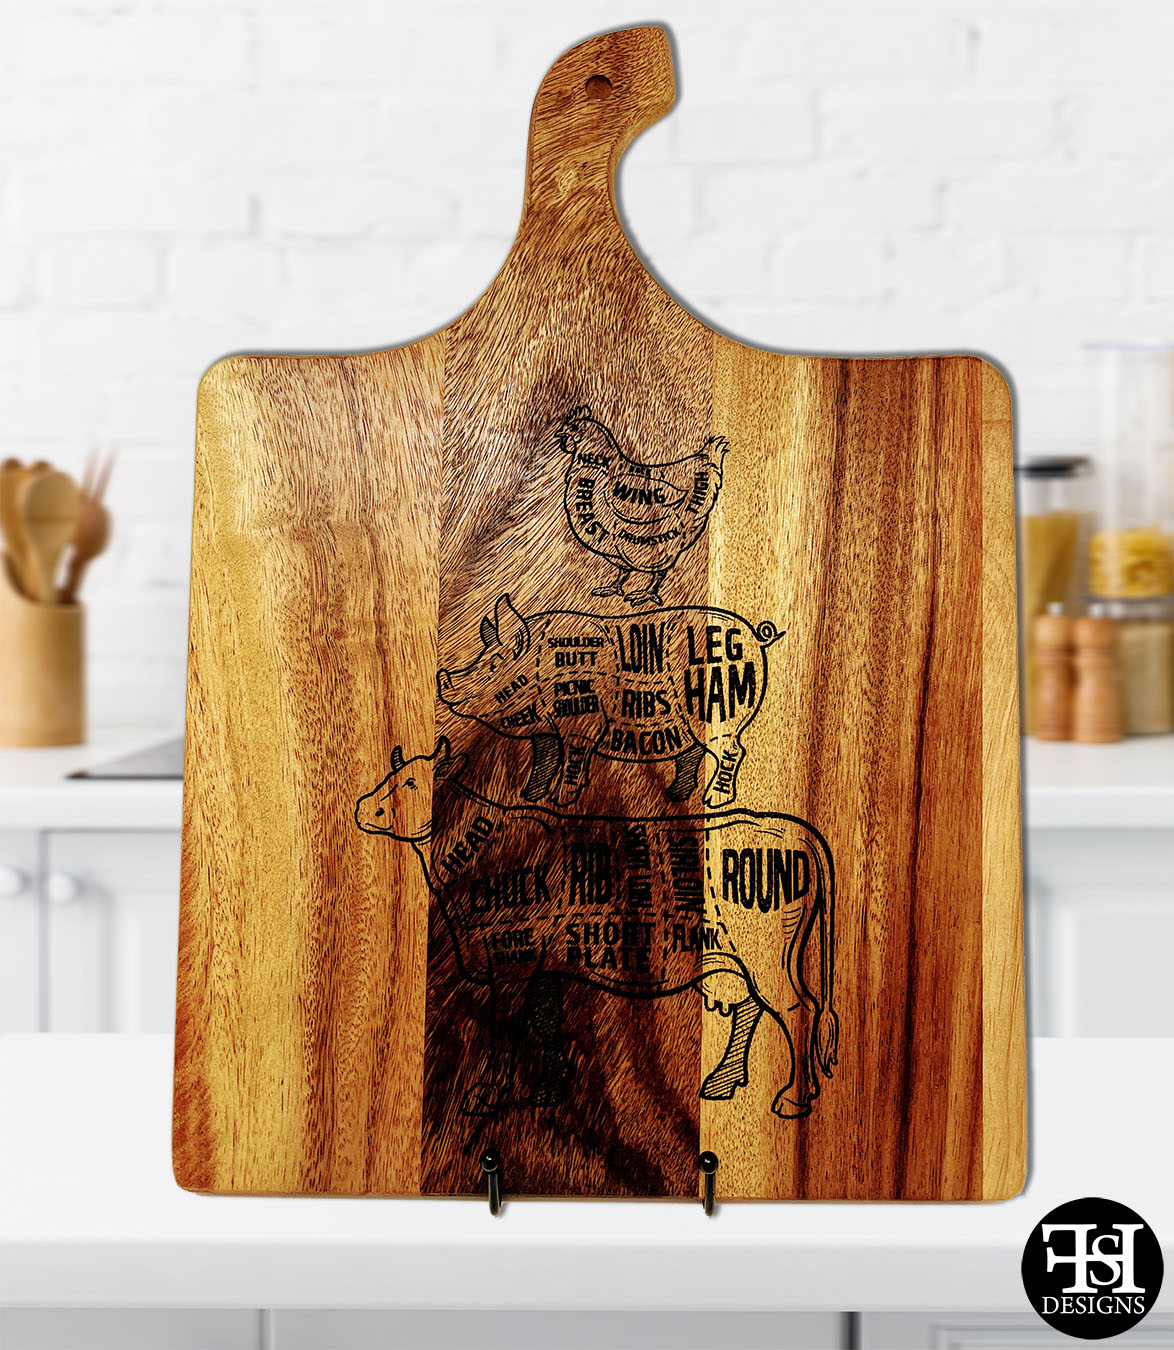 https://www.fhsdesigns.com/wp-content/uploads/cutting-board-acacia-large-curved-handle-meat-cuts-outline-live-bg.jpg